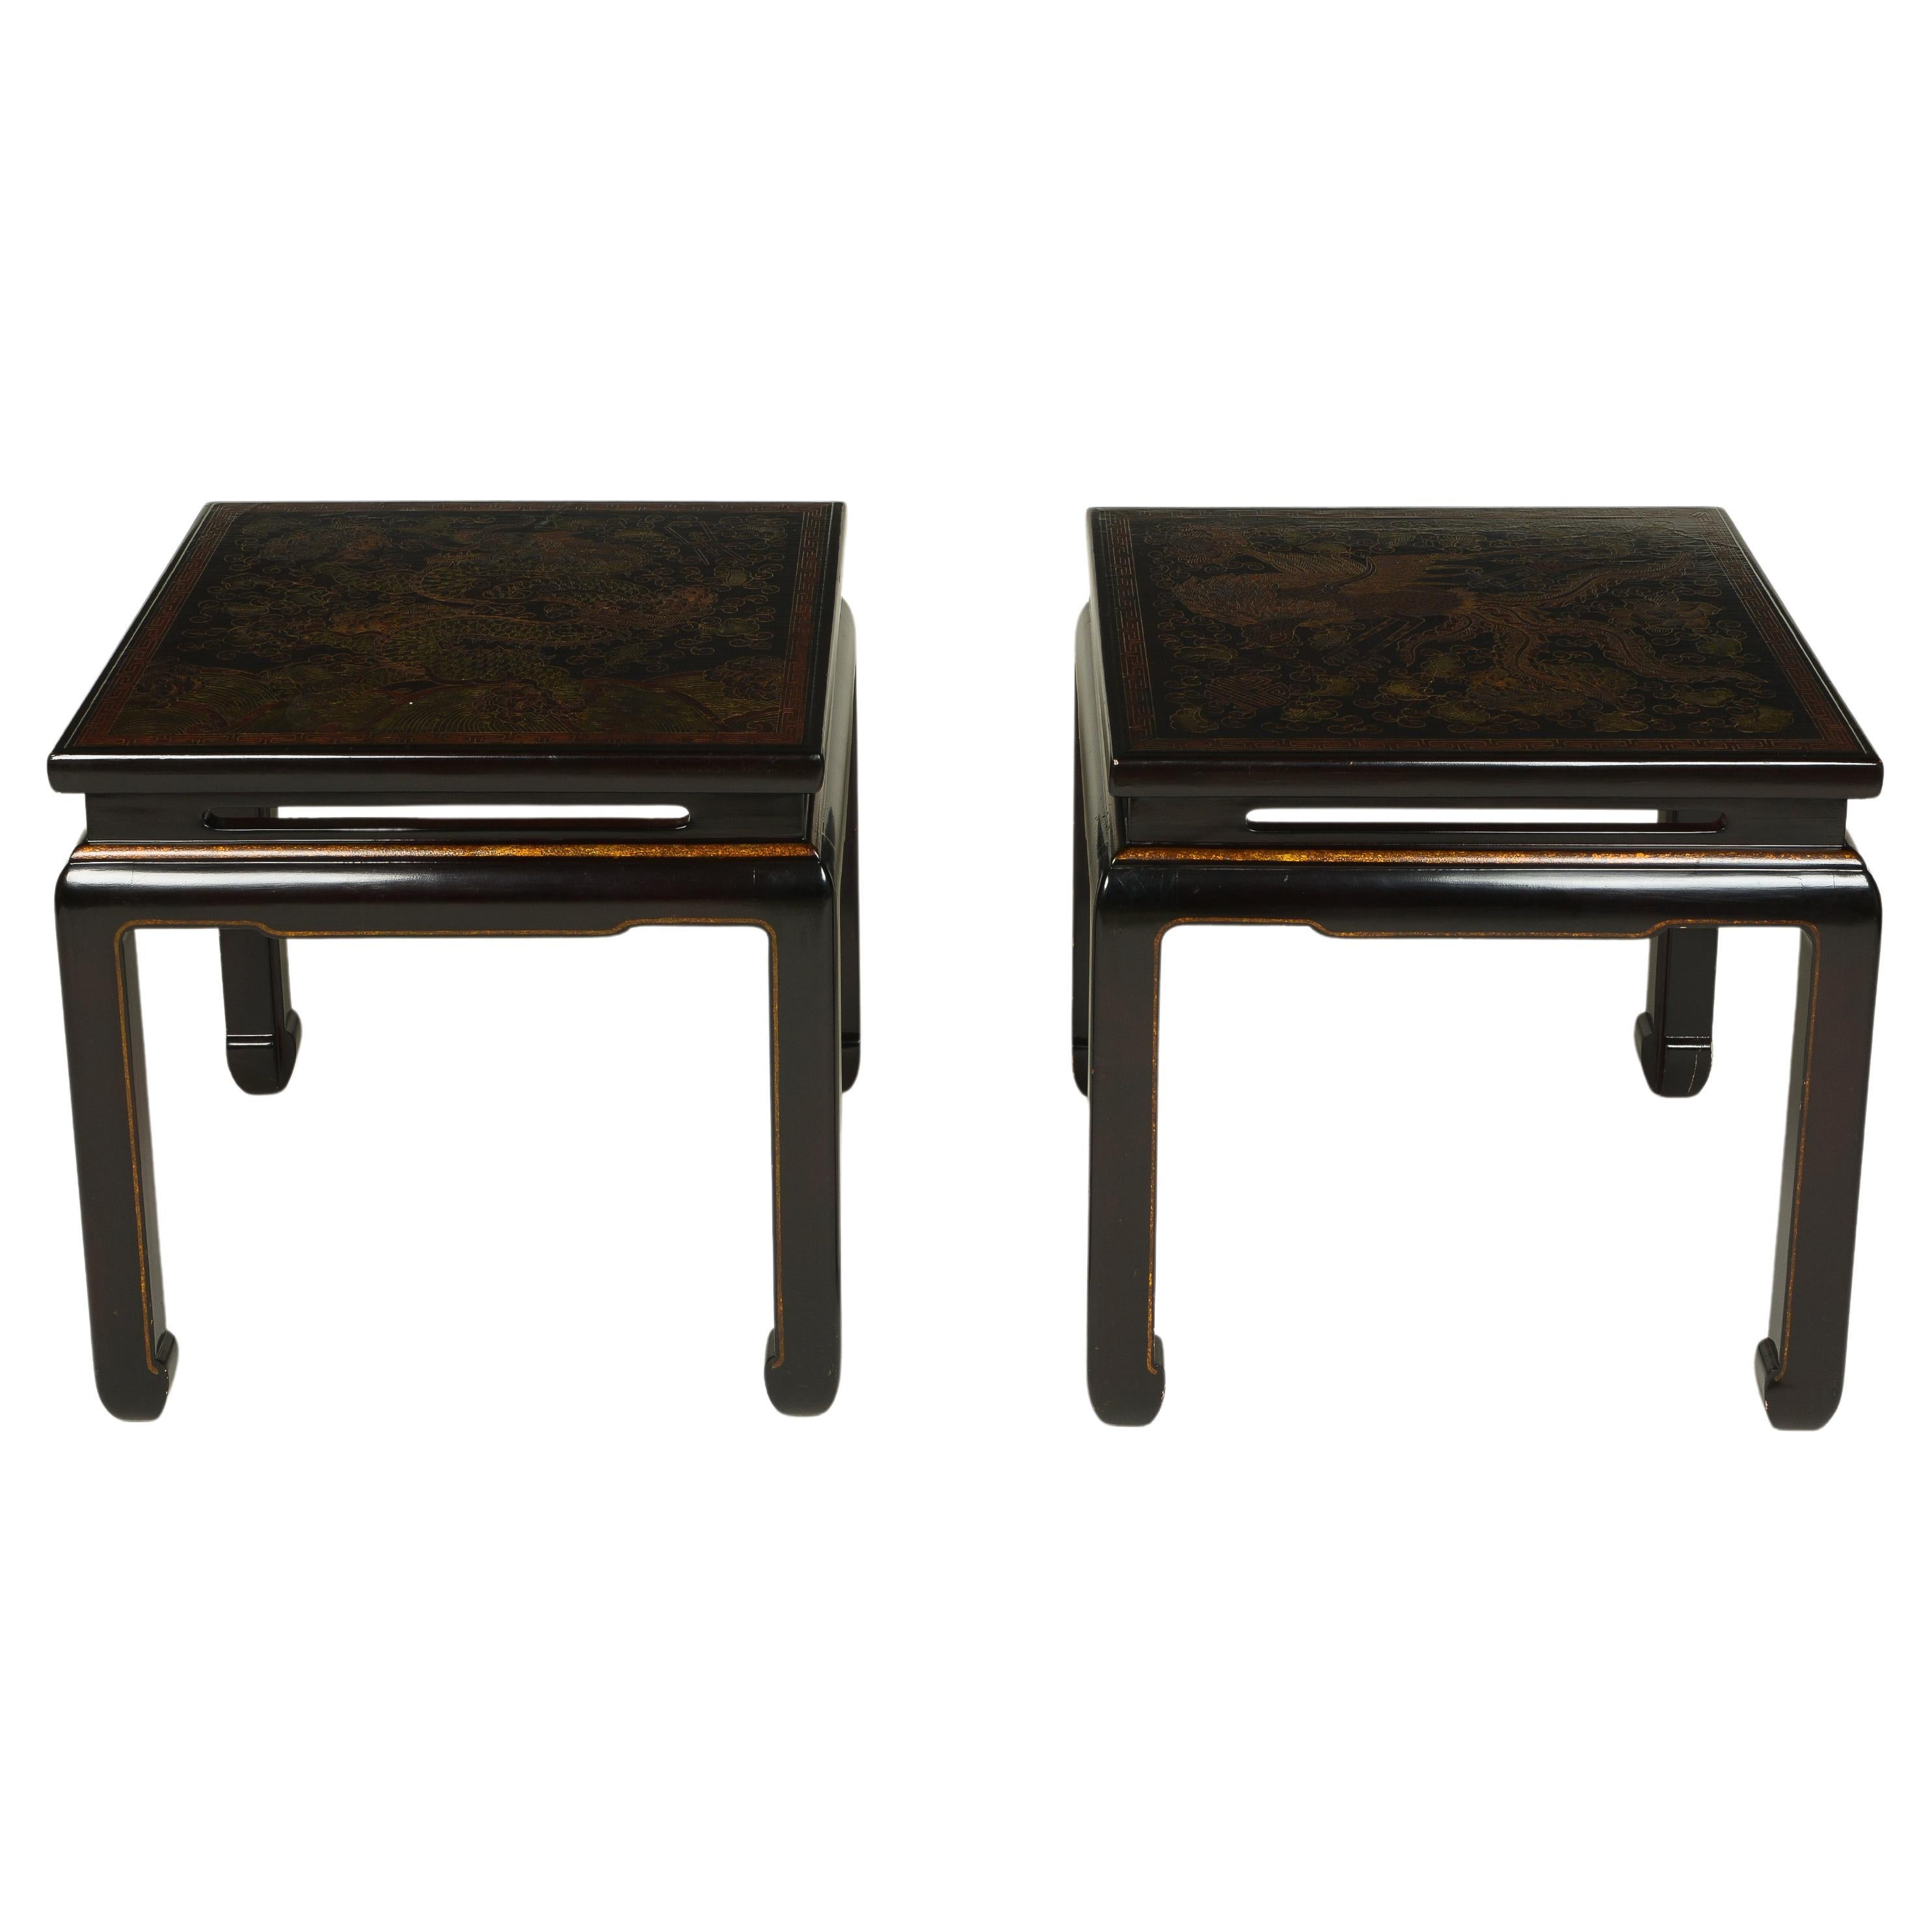 A Pair of Chinoiserie Dark Brown Coromandel Lacquer Square Low Tables For Sale